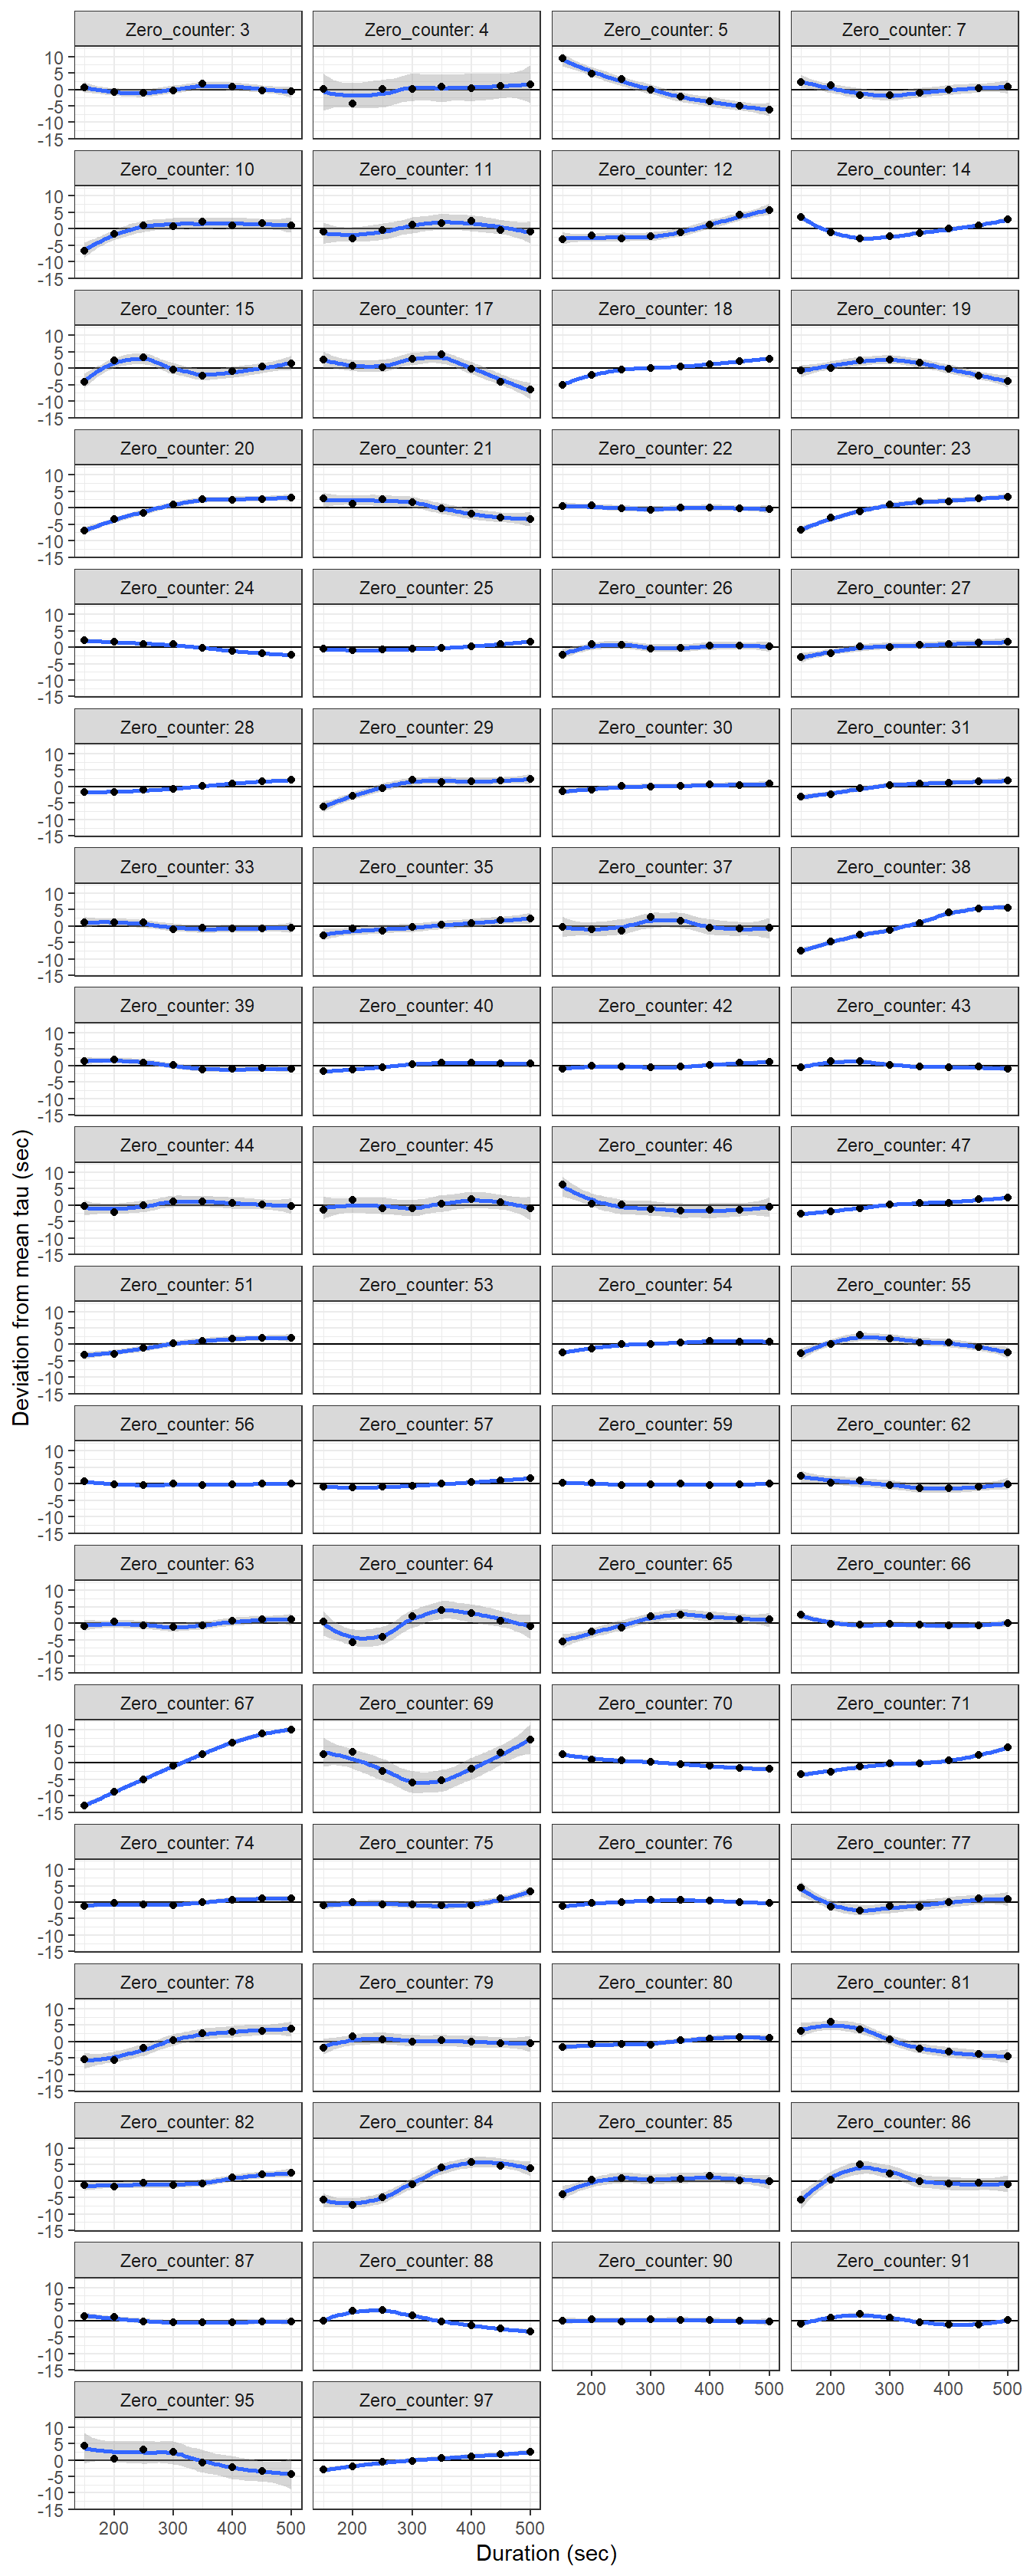 Determined tau values as a function of the fit interval duration, displayed individually for each flush period.